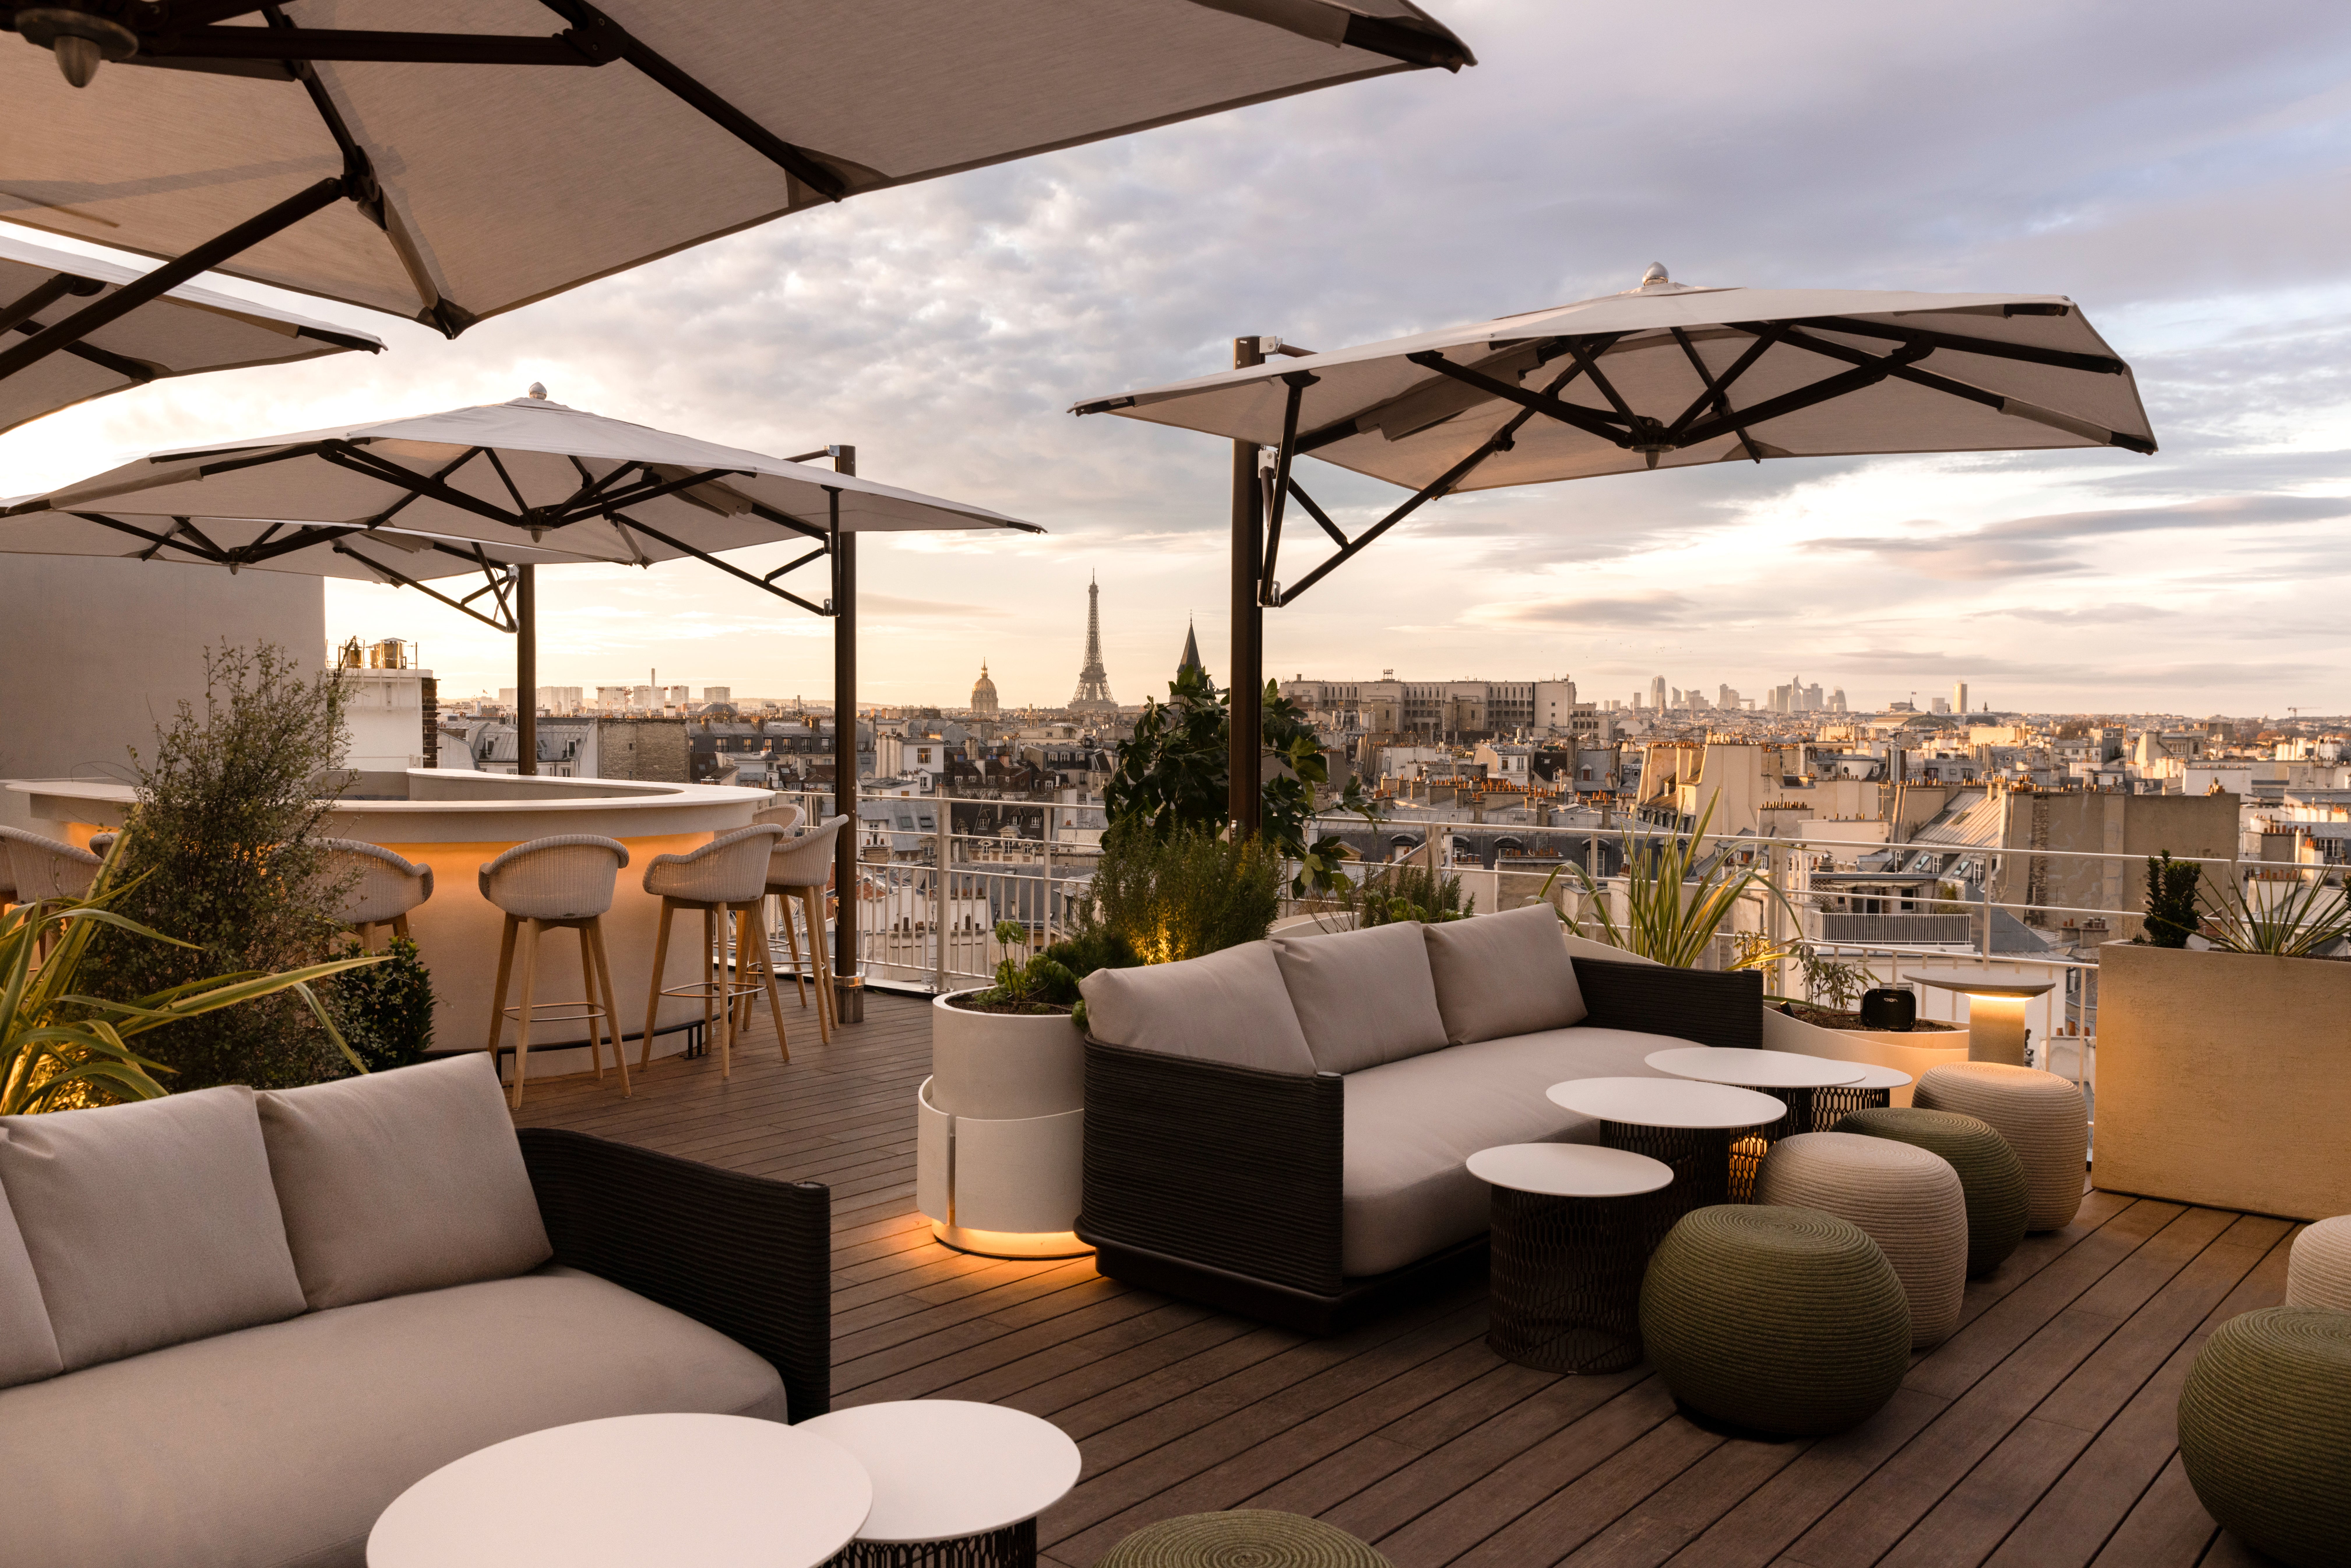 Hotel Dame des Arts in one of Paris’s most desirable locations